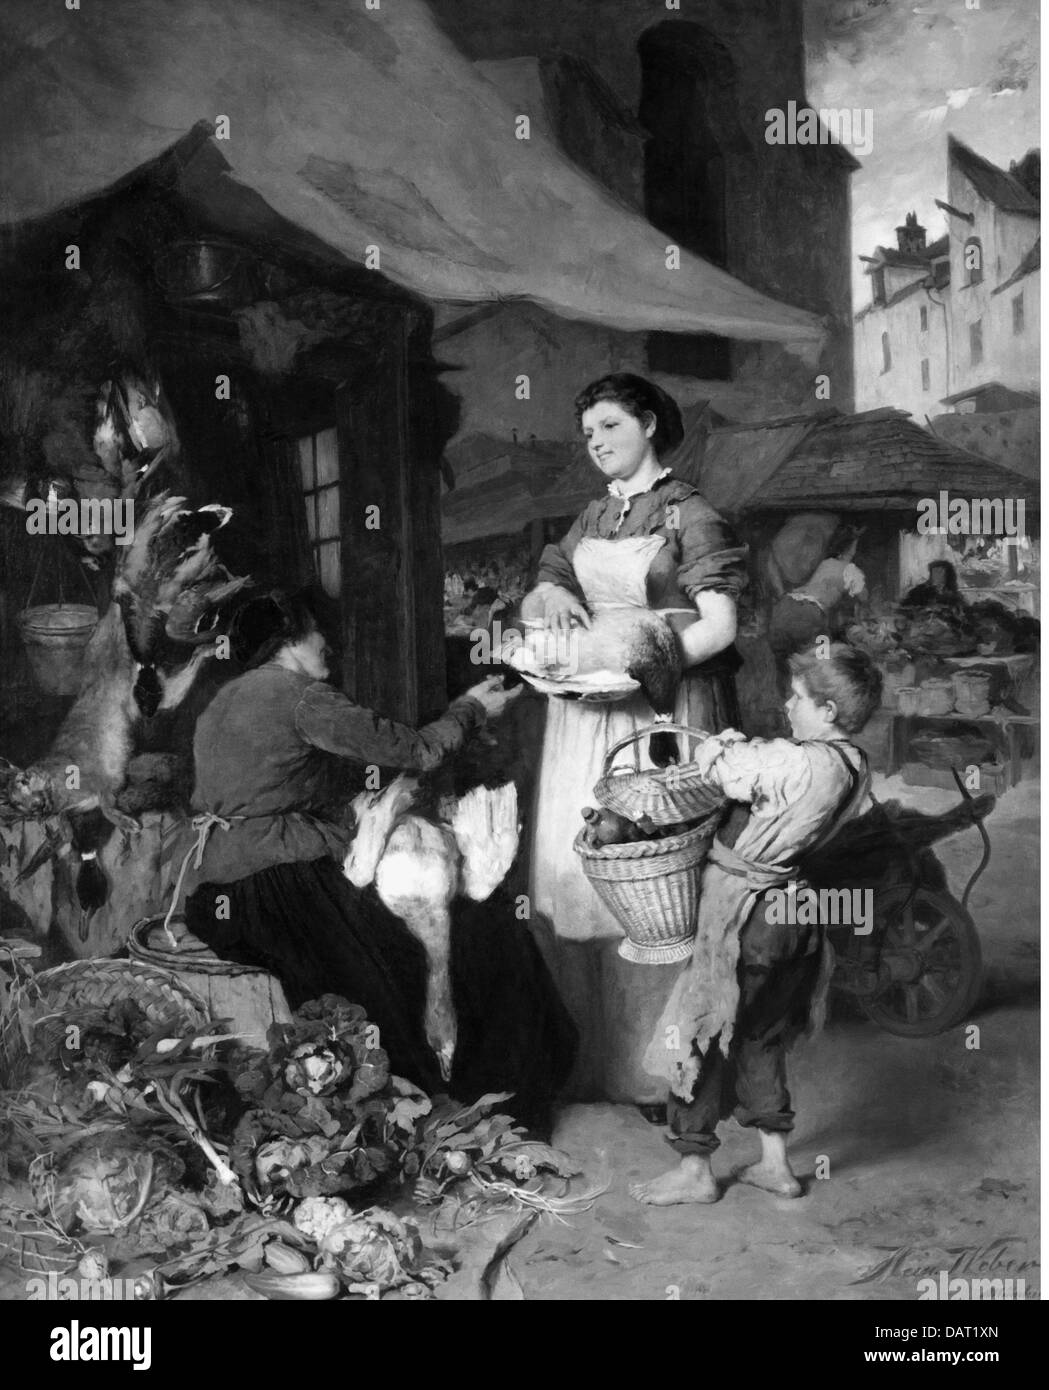 trade,markets,traffic,at the Viktualienmarkt,painting,by Heinrich Weber(1843 - 1913),19th century,19th century,fine arts,art,art of painting,geography / travel,Germany,Bavaria,Munich,merchant,merchants,saleswoman,saleswomen,salesladies,selling,sell,customer,customers,buyer,active buyers,sitting,sit,standing,stall,booth,stalls,booths,basket,baskets,vegetable,vegetables,meat,game,venison,poultry,rabbit,goose,geese,gander,duck,ducks,carrying,carry,genre painting,genre works,genre scenes,food product market,mark,Additional-Rights-Clearences-Not Available Stock Photo